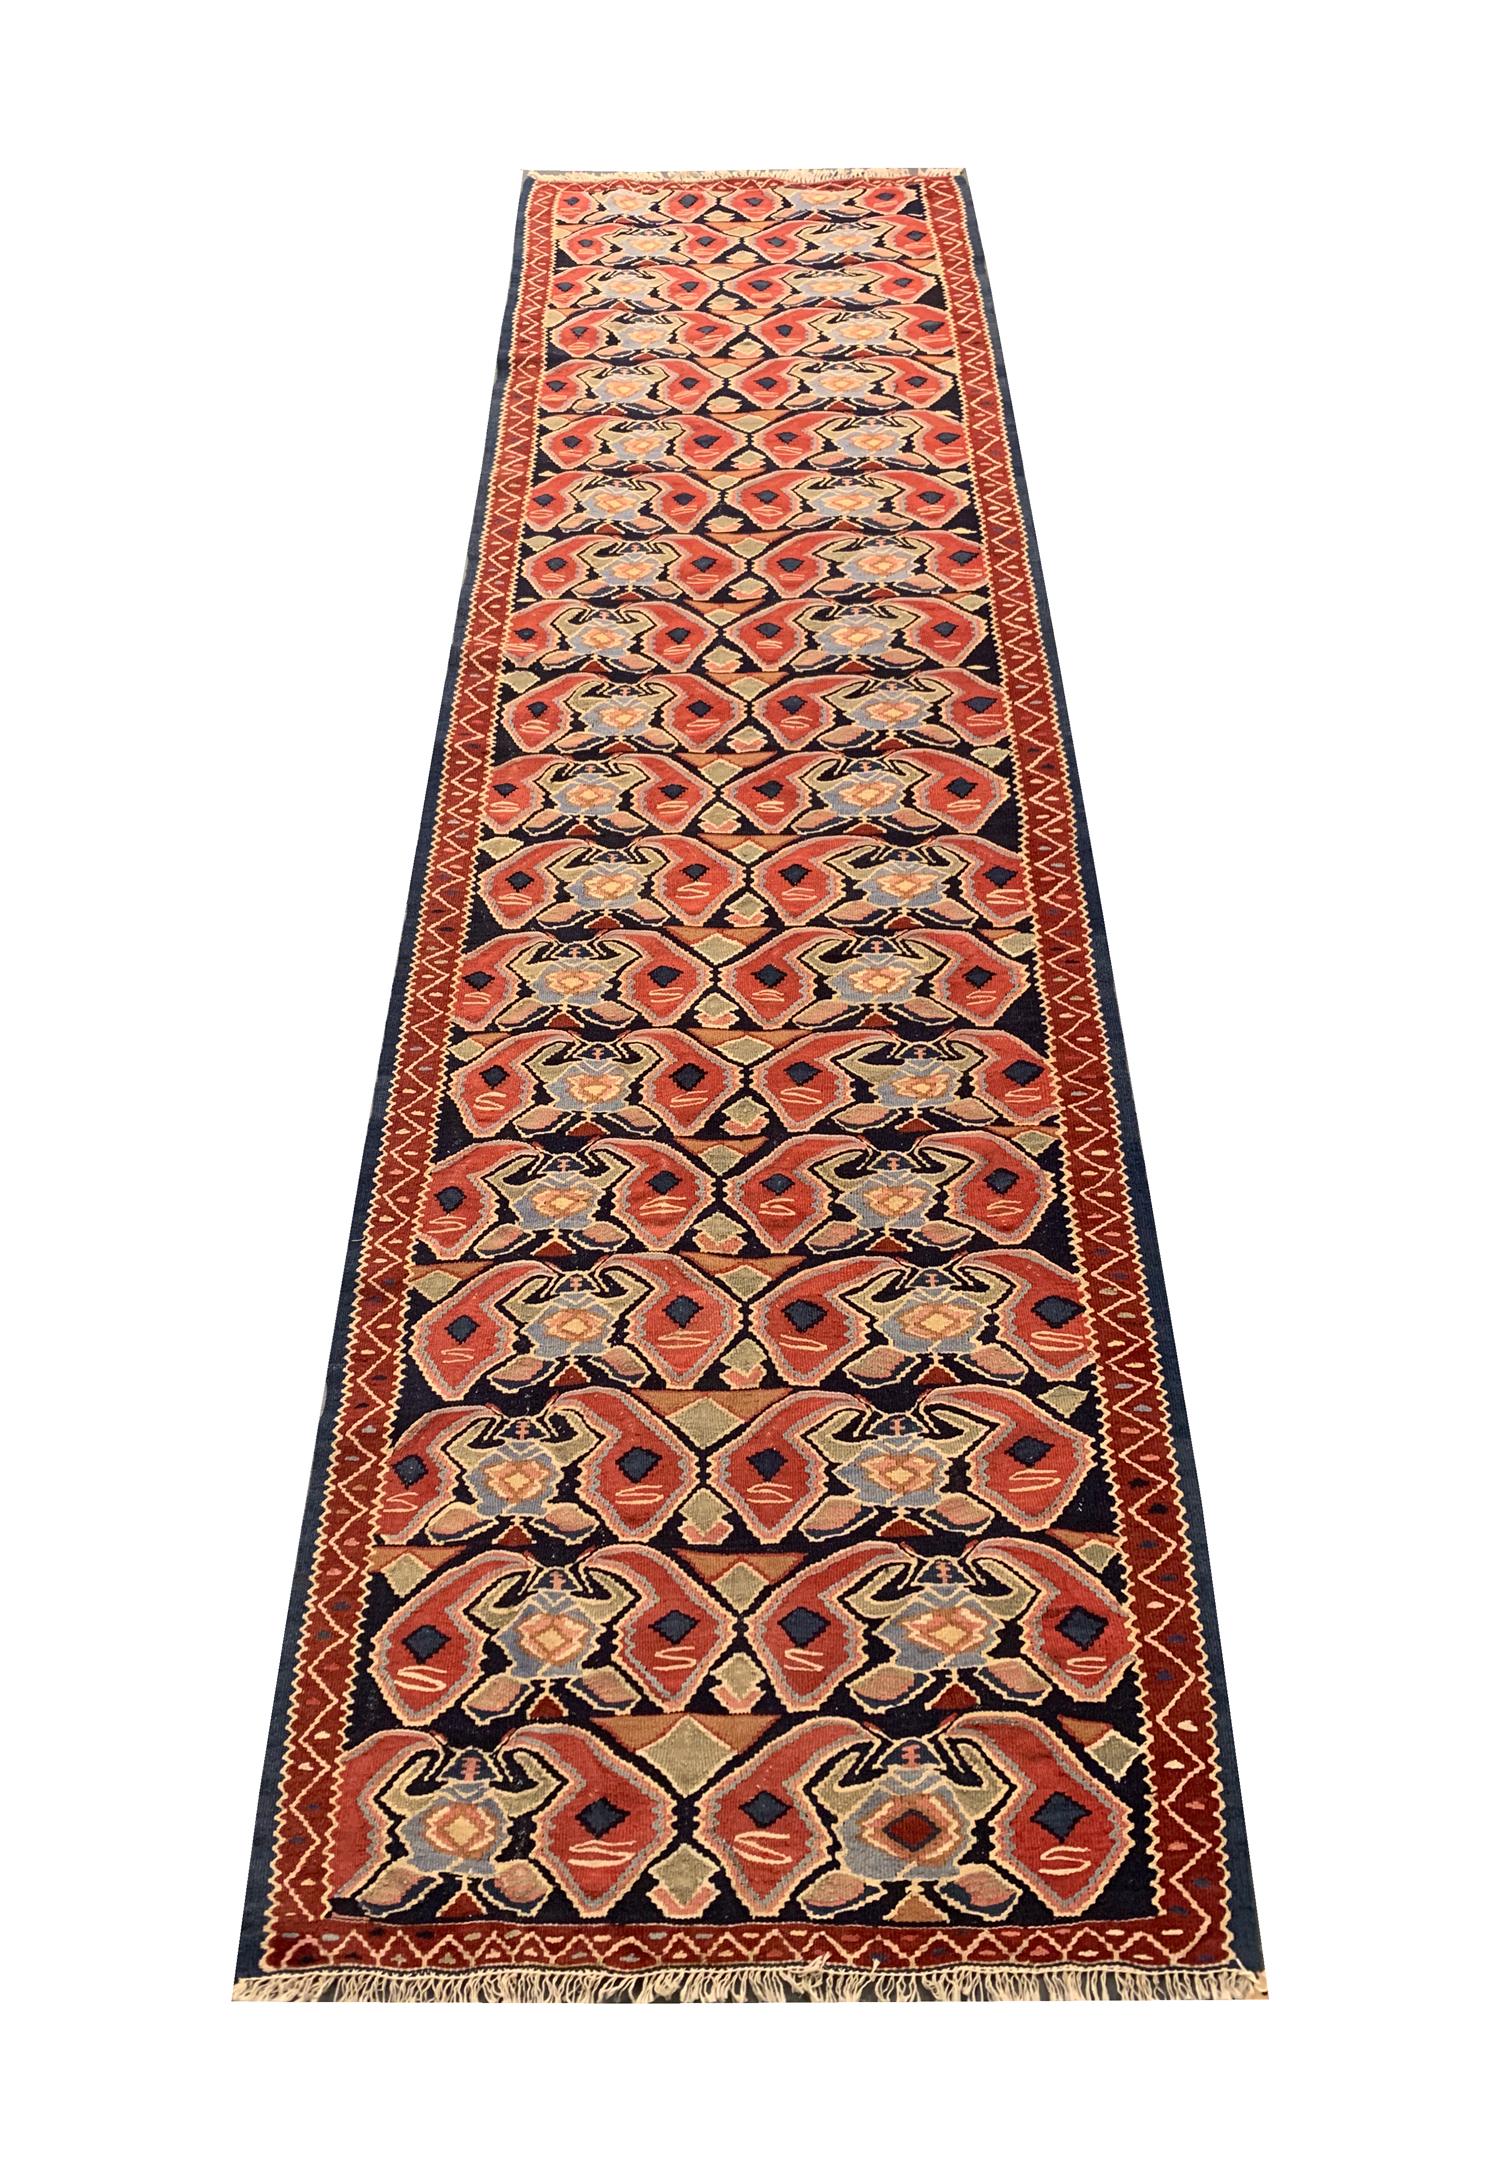 This elegant flat-weave runner rug is an excellent example of Caucasian Kilims from the 1950s. The design features a repeating all over pattern woven with accents of red, beige blue and green. The design and colour palette in this runner rug is sure